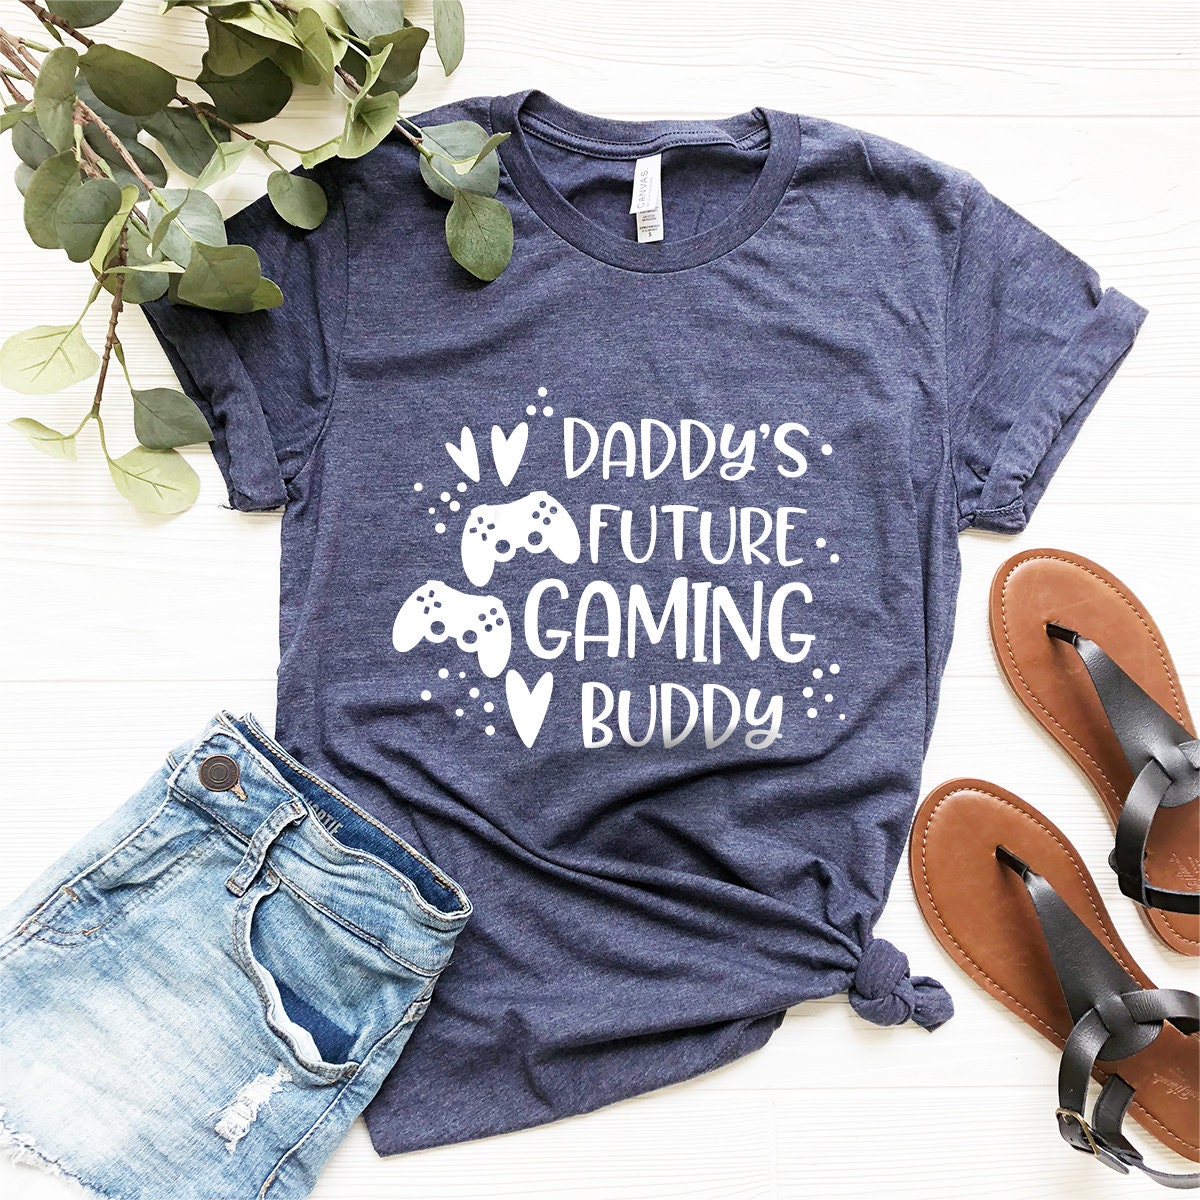 Daddy Gamer T Shirt, Daddy And Baby Shirt, Funny Baby Shirt, Daddy's Gaming Buddy Shirt, New Dad T-Shirt, Gift For Dad, Daddy and Me Shirt - Fastdeliverytees.com